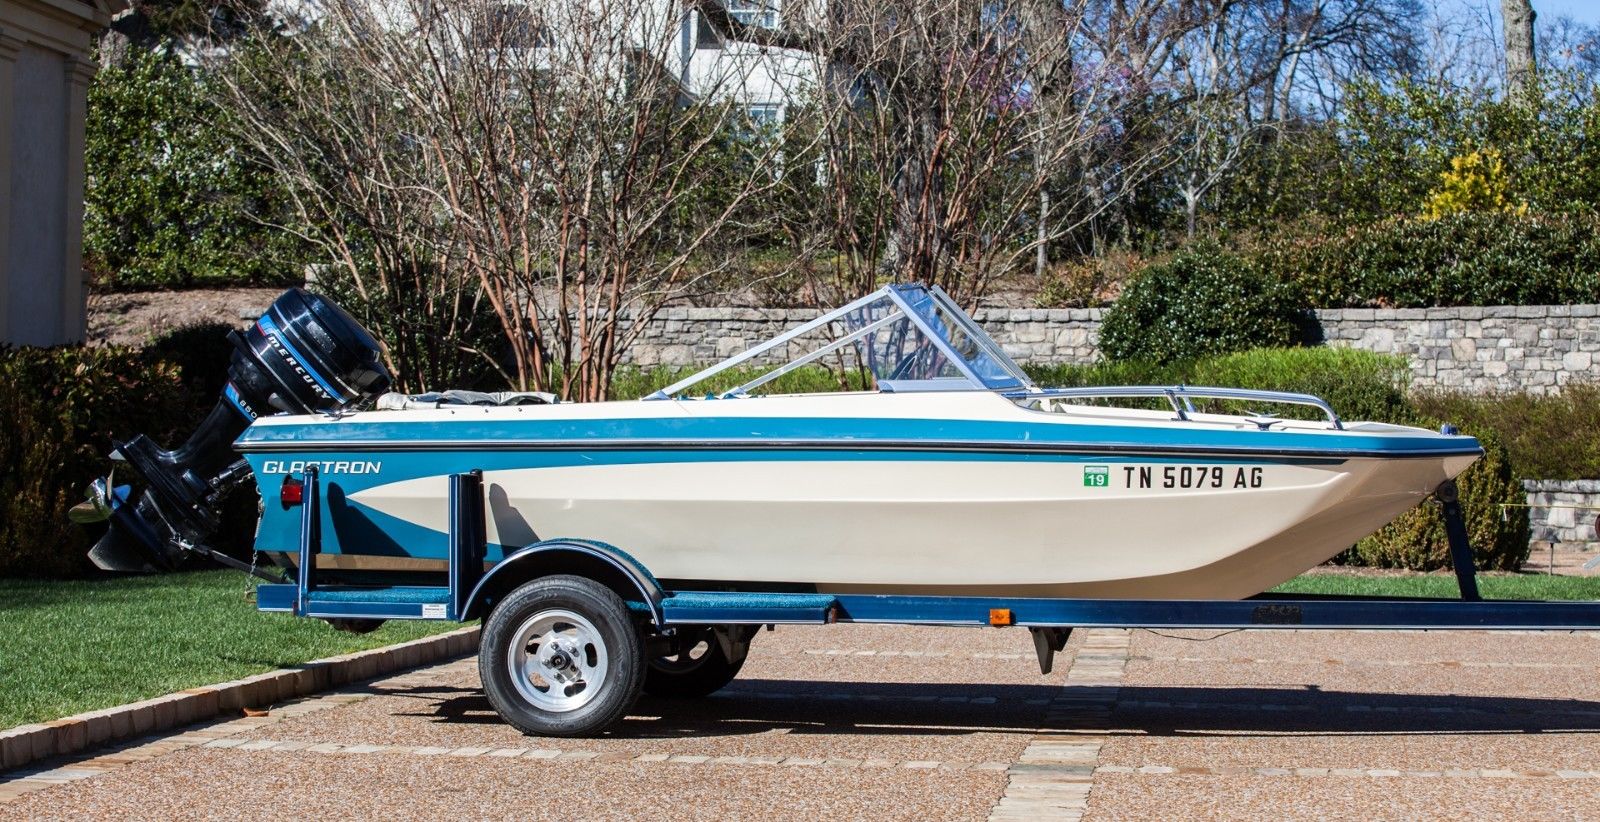 Glastron T166 Sportster 1977 for sale for $1,000 - Boats 